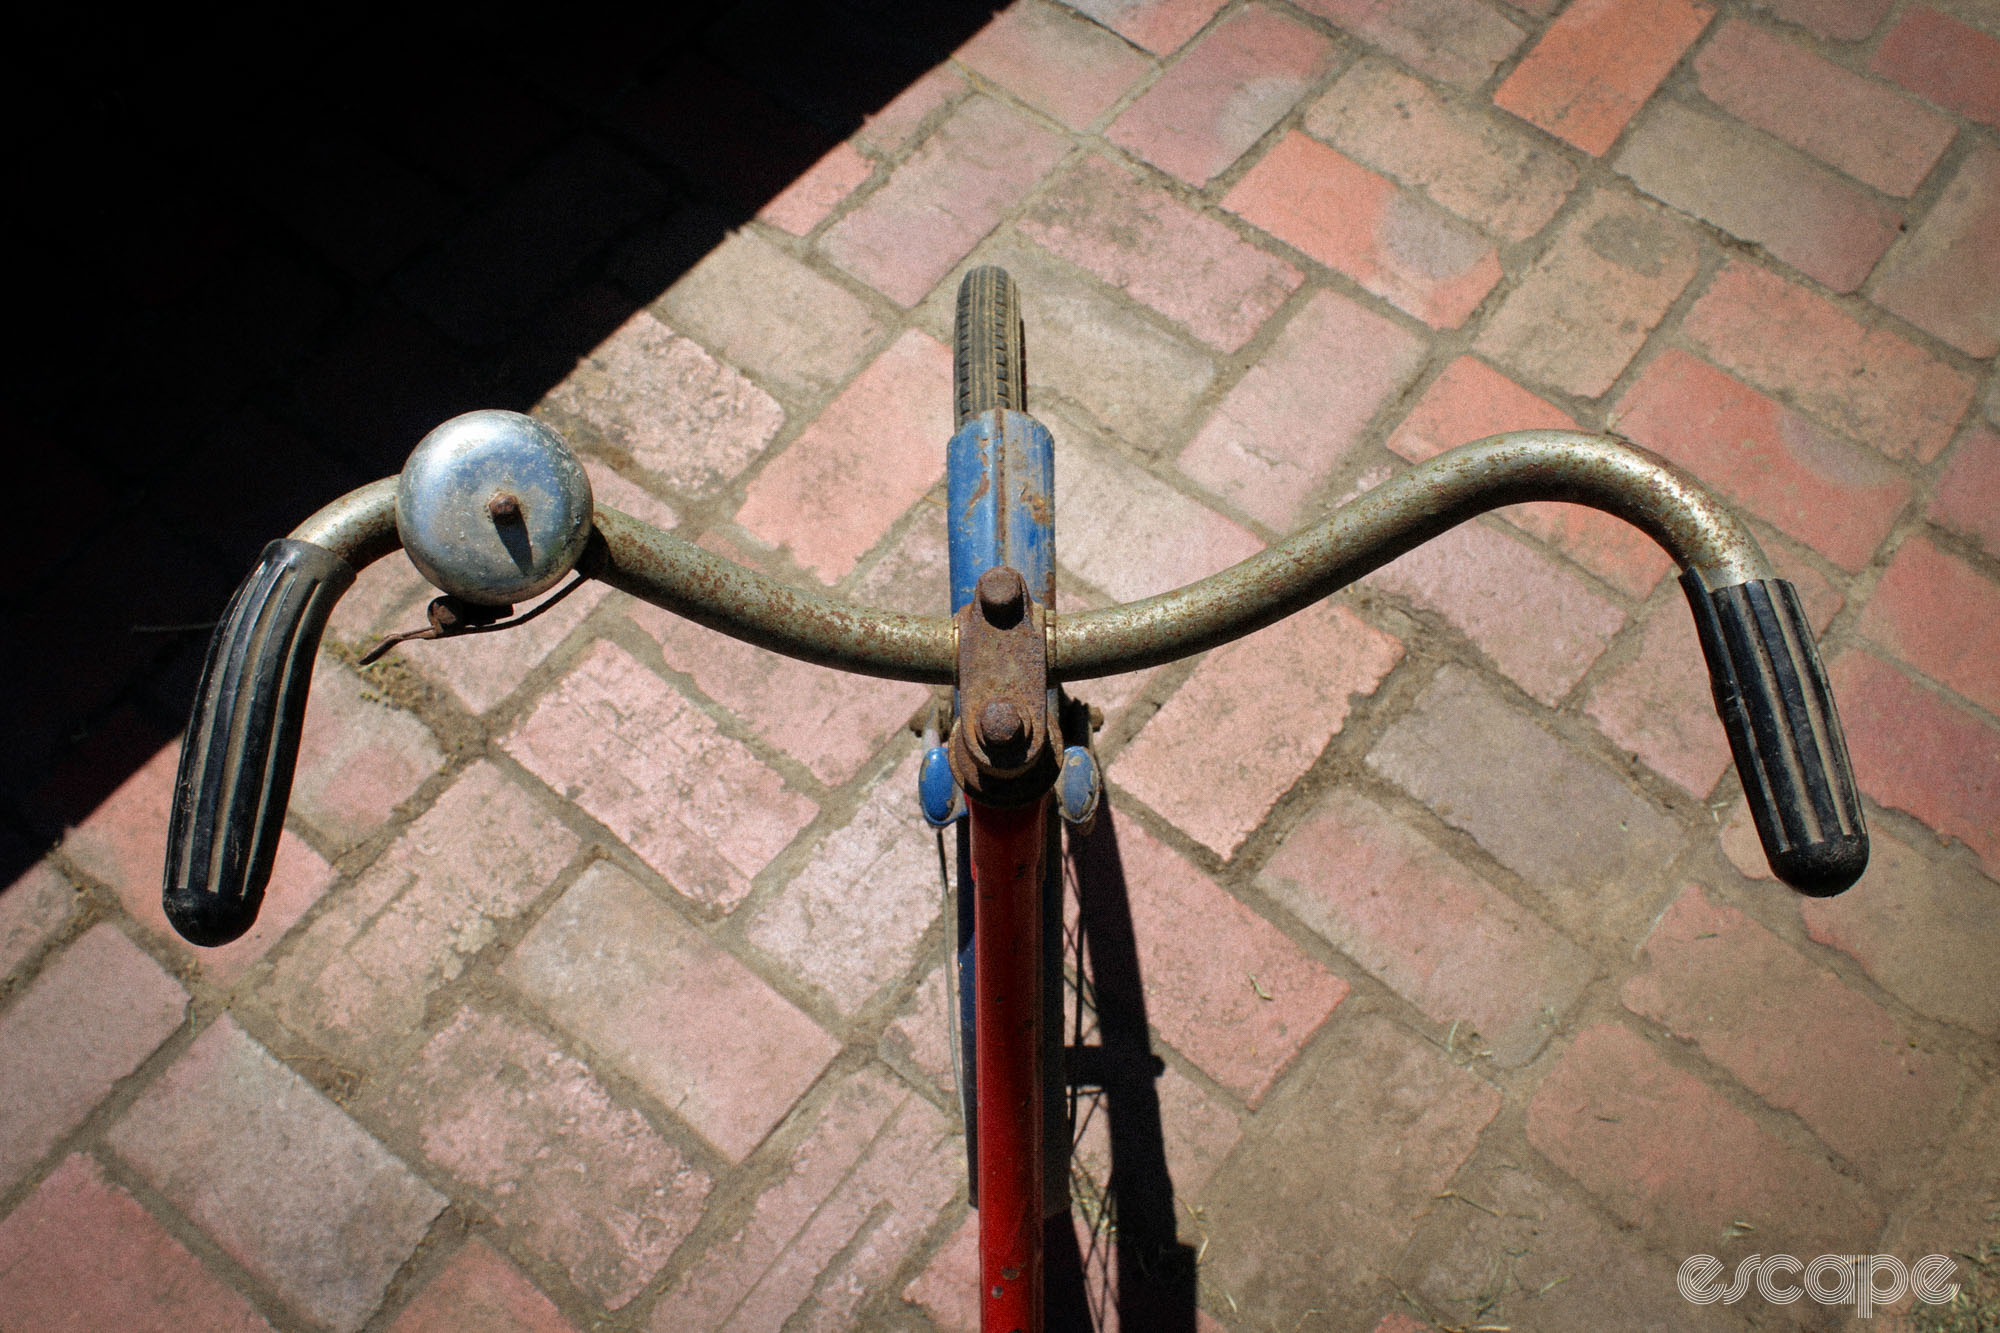 A view from above of a pair of rusty backswept handlebars.